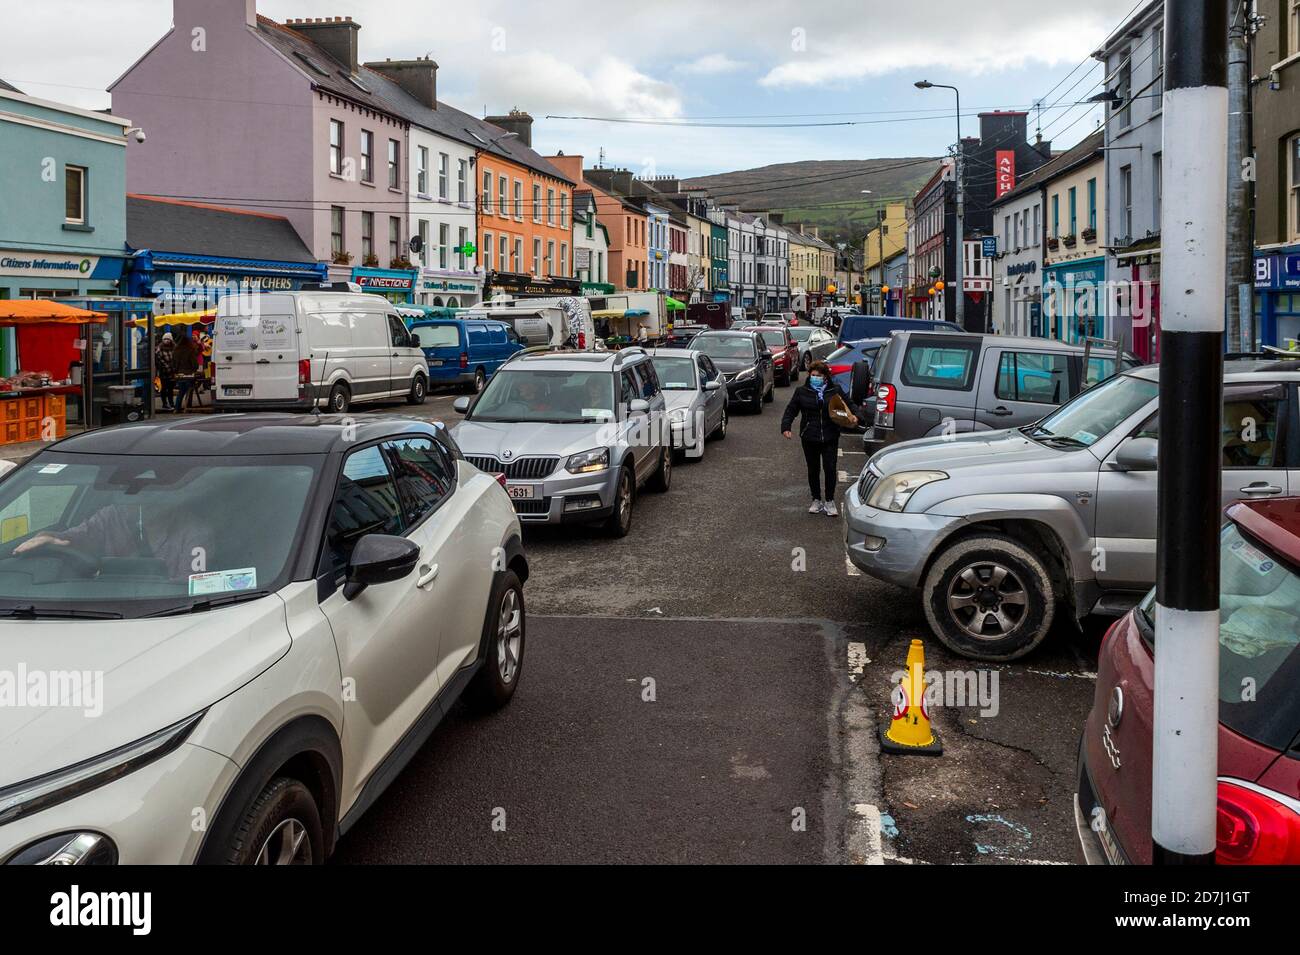 Bantry, West Cork, Ireland. 23rd Oct, 2020. Bantry Friday Market is operating today and is quieter than usual. However, traffic in and around Bantry was backed up with long lines of cars. Credit: AG News/Alamy Live News Stock Photo